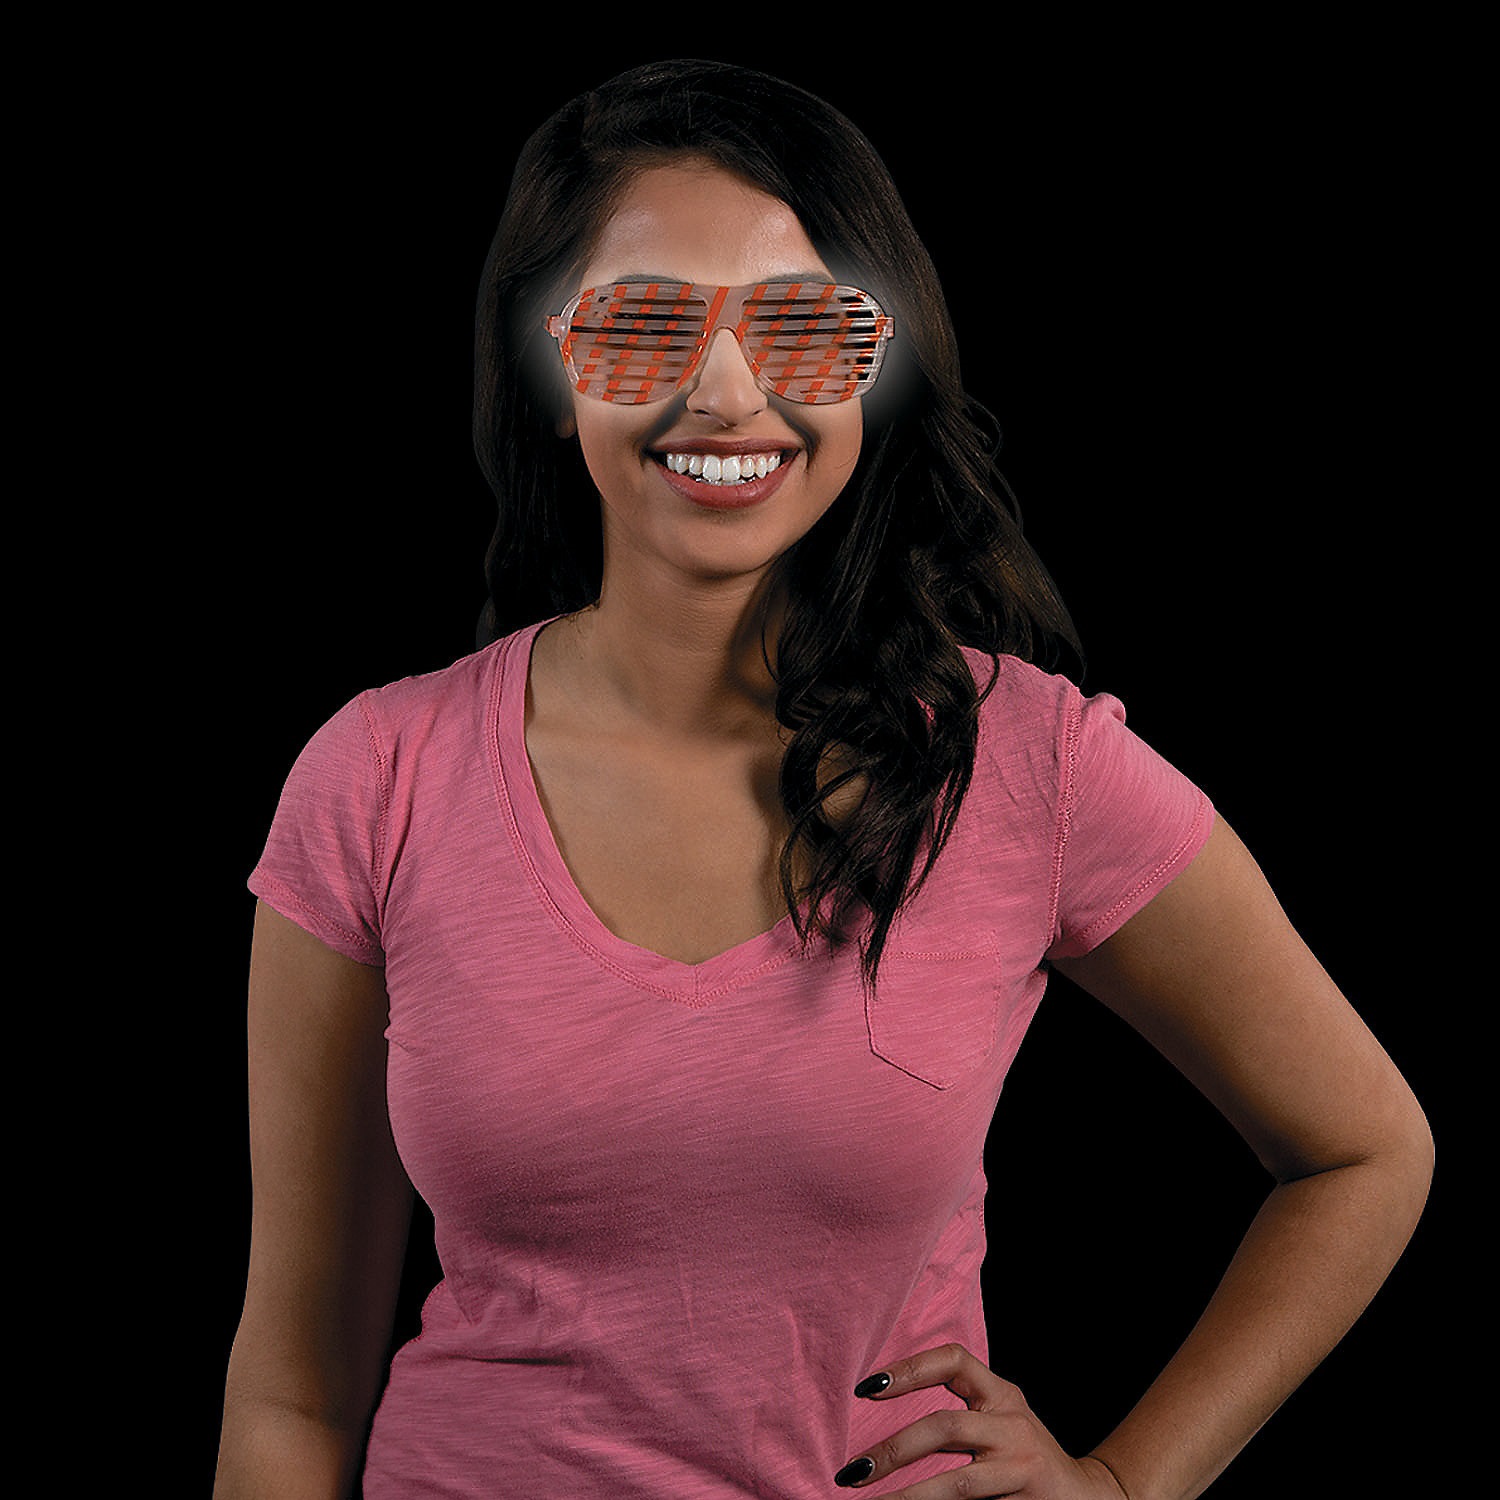 adult-s-bright-color-glow-in-the-dark-shutter-glasses-12-pc-_39_2132-a02